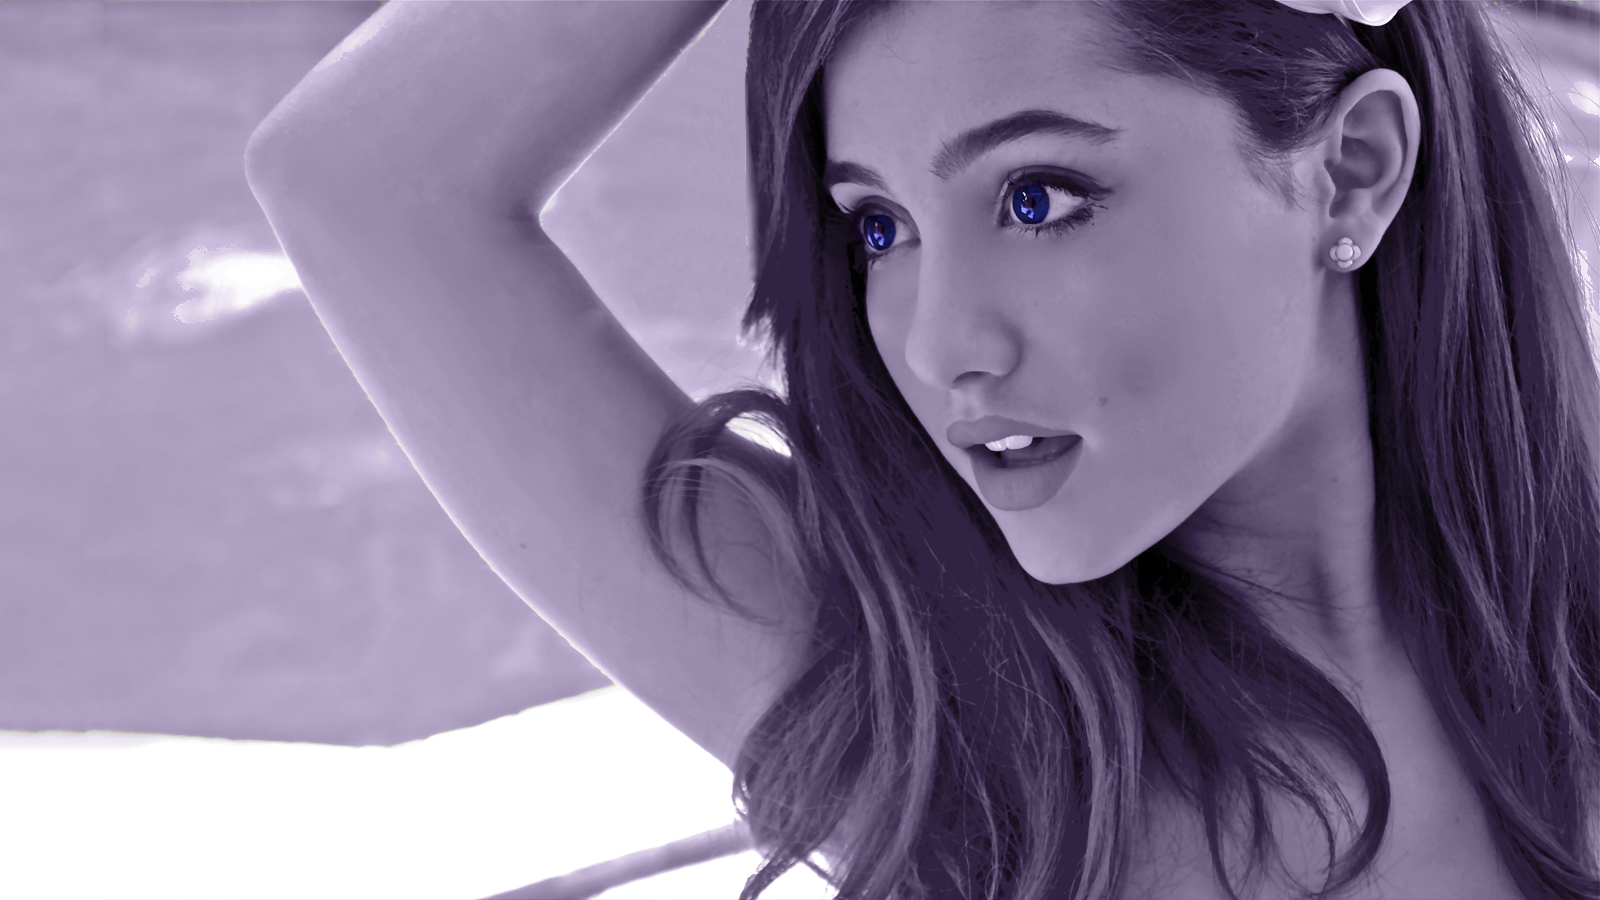 People 1600x900 Ariana Grande face arms up women model photo manipulation long hair profile